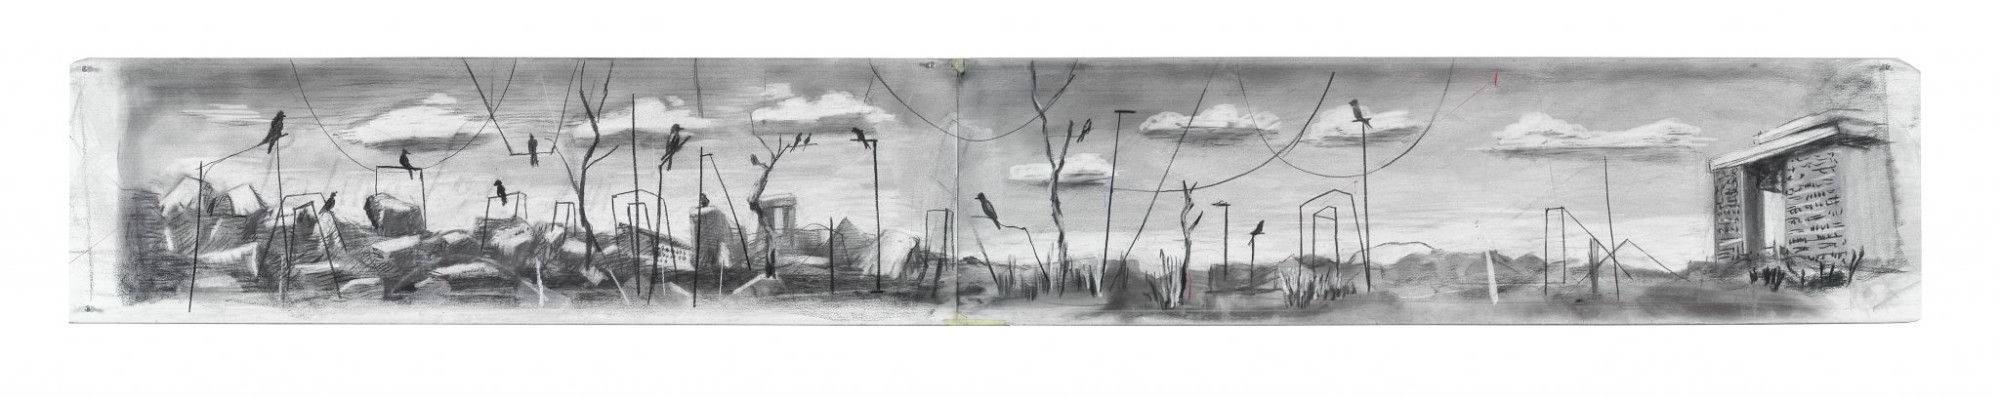 <div class="lightbox-artworktitle">Drawing for The Magic Flute (Birds on Poles)</div><div class="lightbox-artworkyear">2004</div><div class="lightbox-artworkdescription">Charcoal and Pastel on paper</div><div class="lightbox-artworkdimension"></div><div class="lightbox-artworkdimension"></div><div class="lightbox-tagswithlinks"><A rel='nofollow' href='/page/1/?s=%23Charcoal'>#Charcoal</A> <A rel='nofollow' href='/page/1/?s=%23Paper'>#Paper</A> <A rel='nofollow' href='/page/1/?s=%23TheMagicFlute'>#TheMagicFlute</A> <A rel='nofollow' href='/page/1/?s=%23Pastel'>#Pastel</A></div>